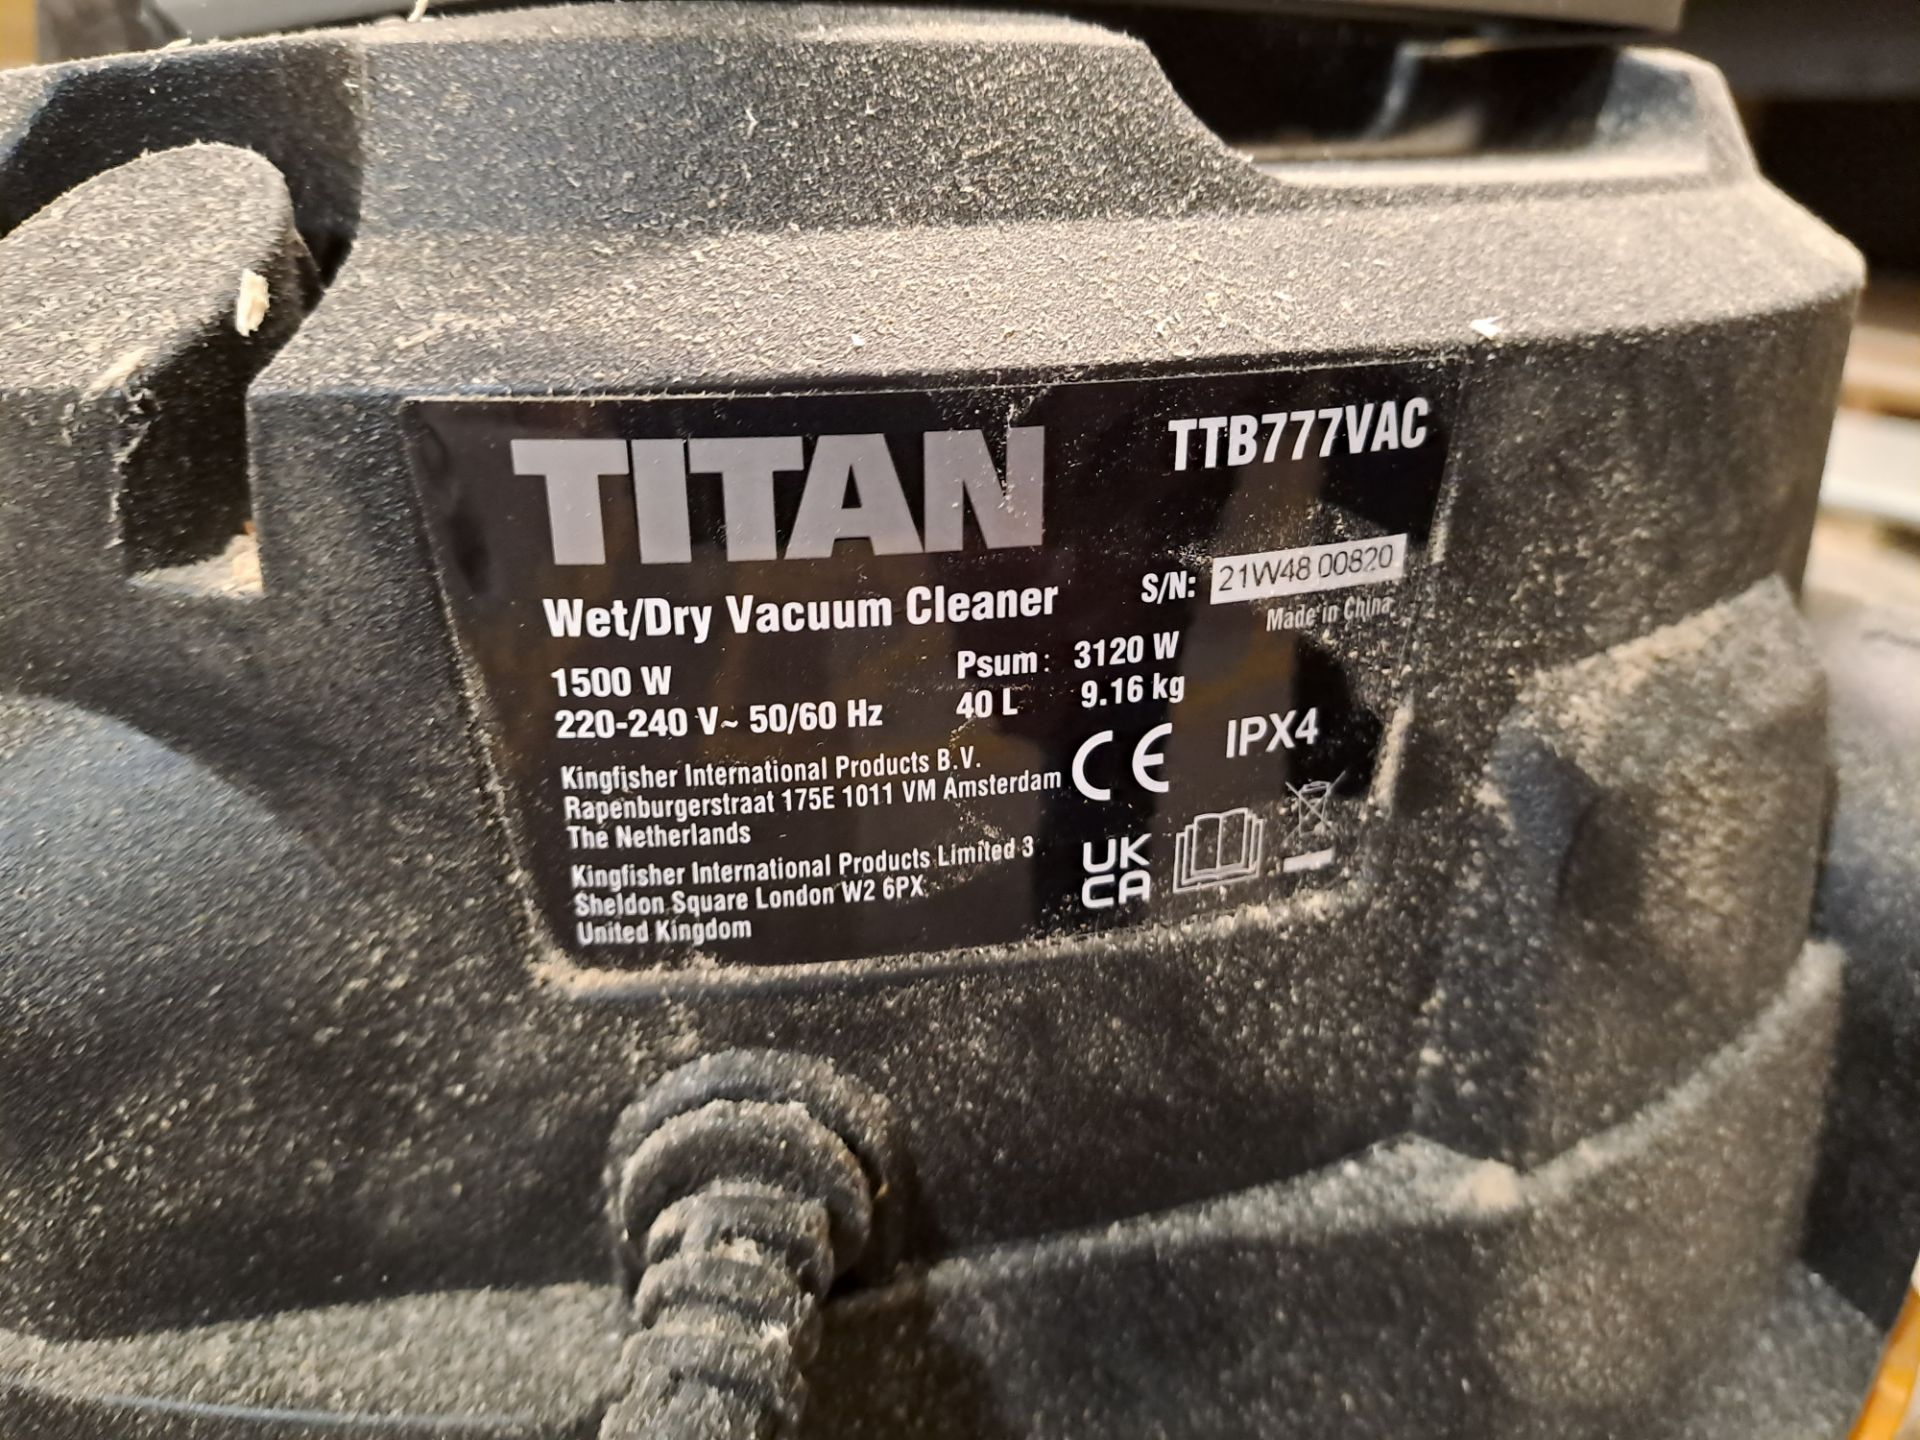 2 x Various Titan wet/dry vacuum cleaners, both 240v - Image 3 of 5